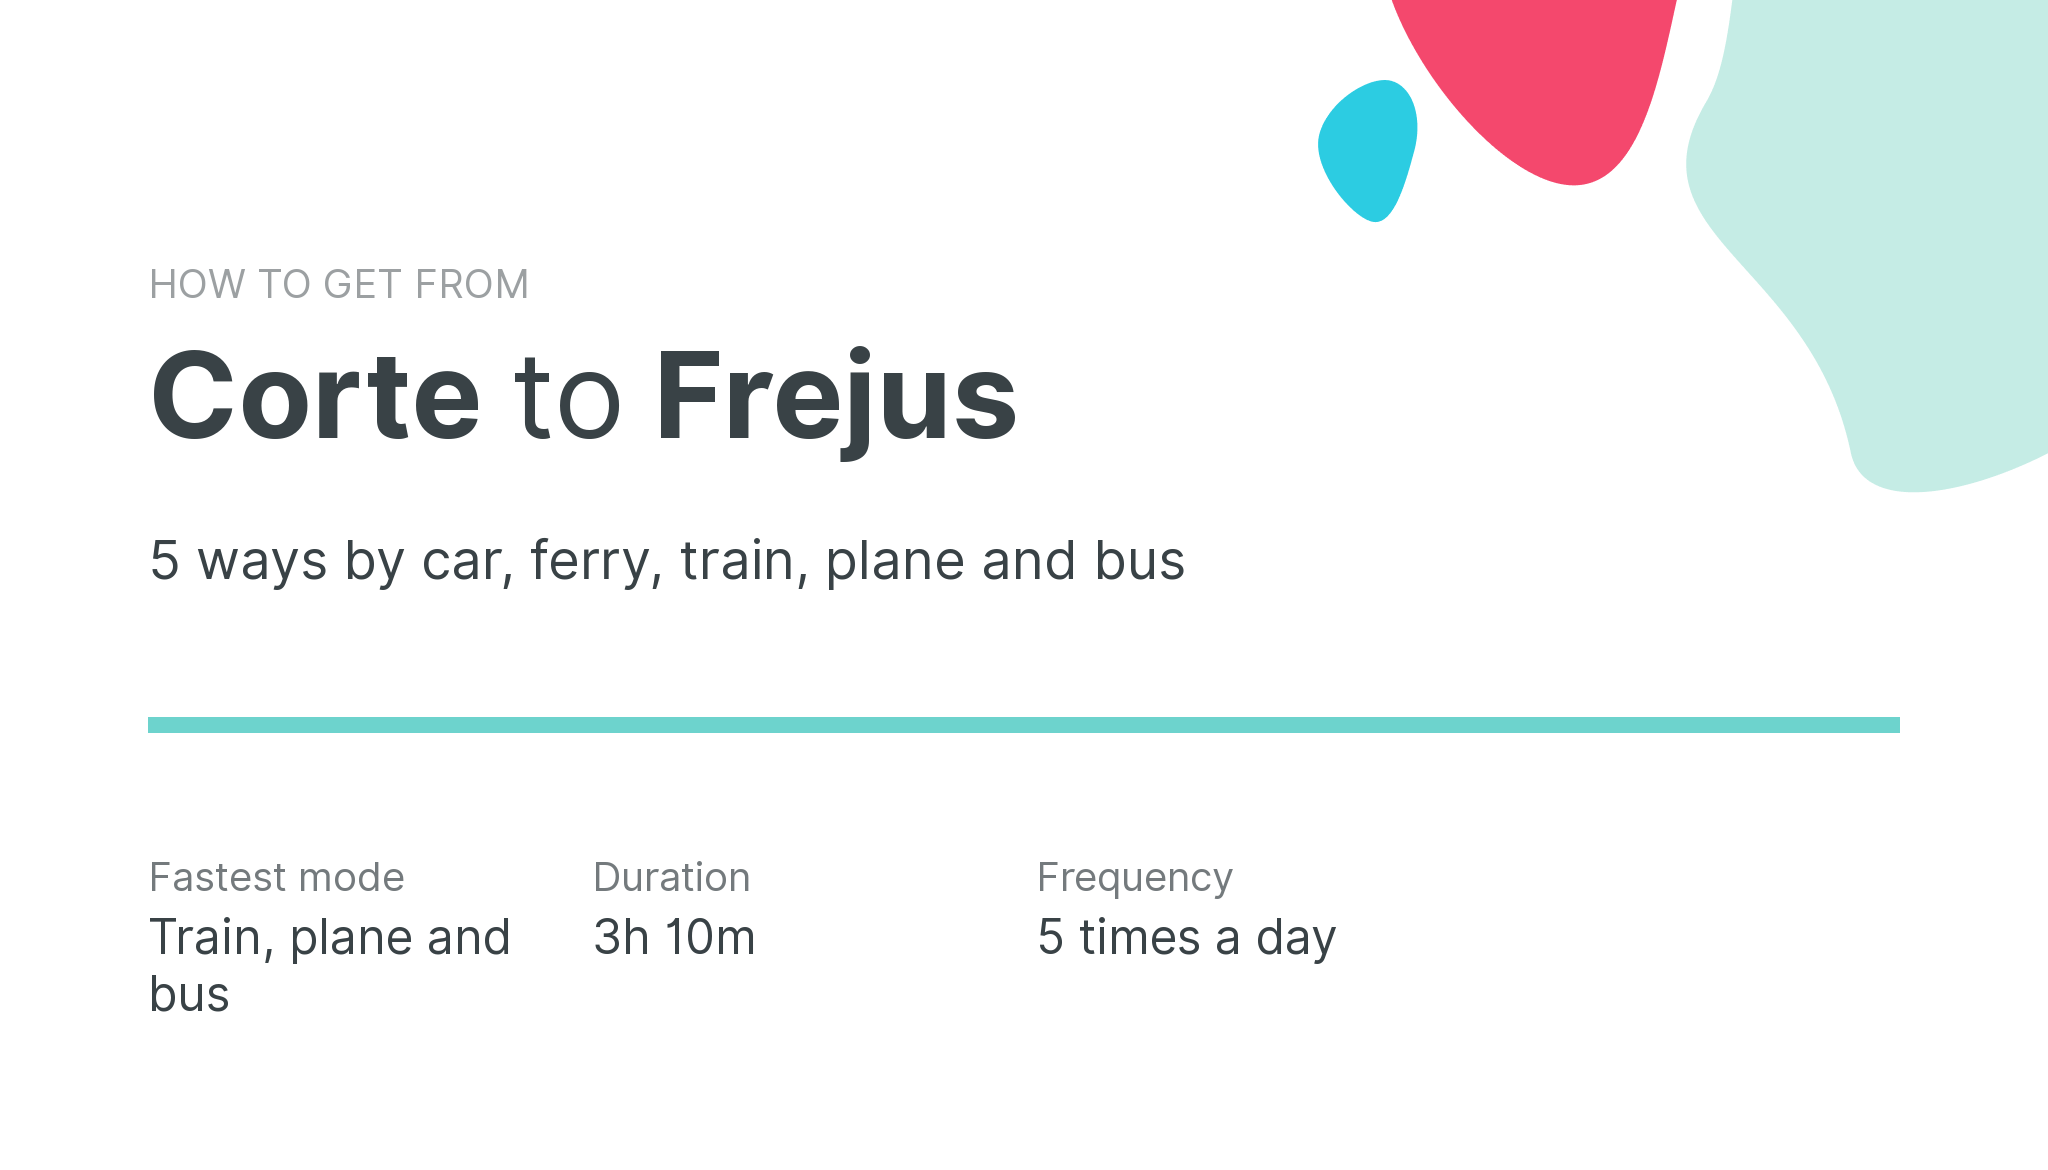 How do I get from Corte to Frejus